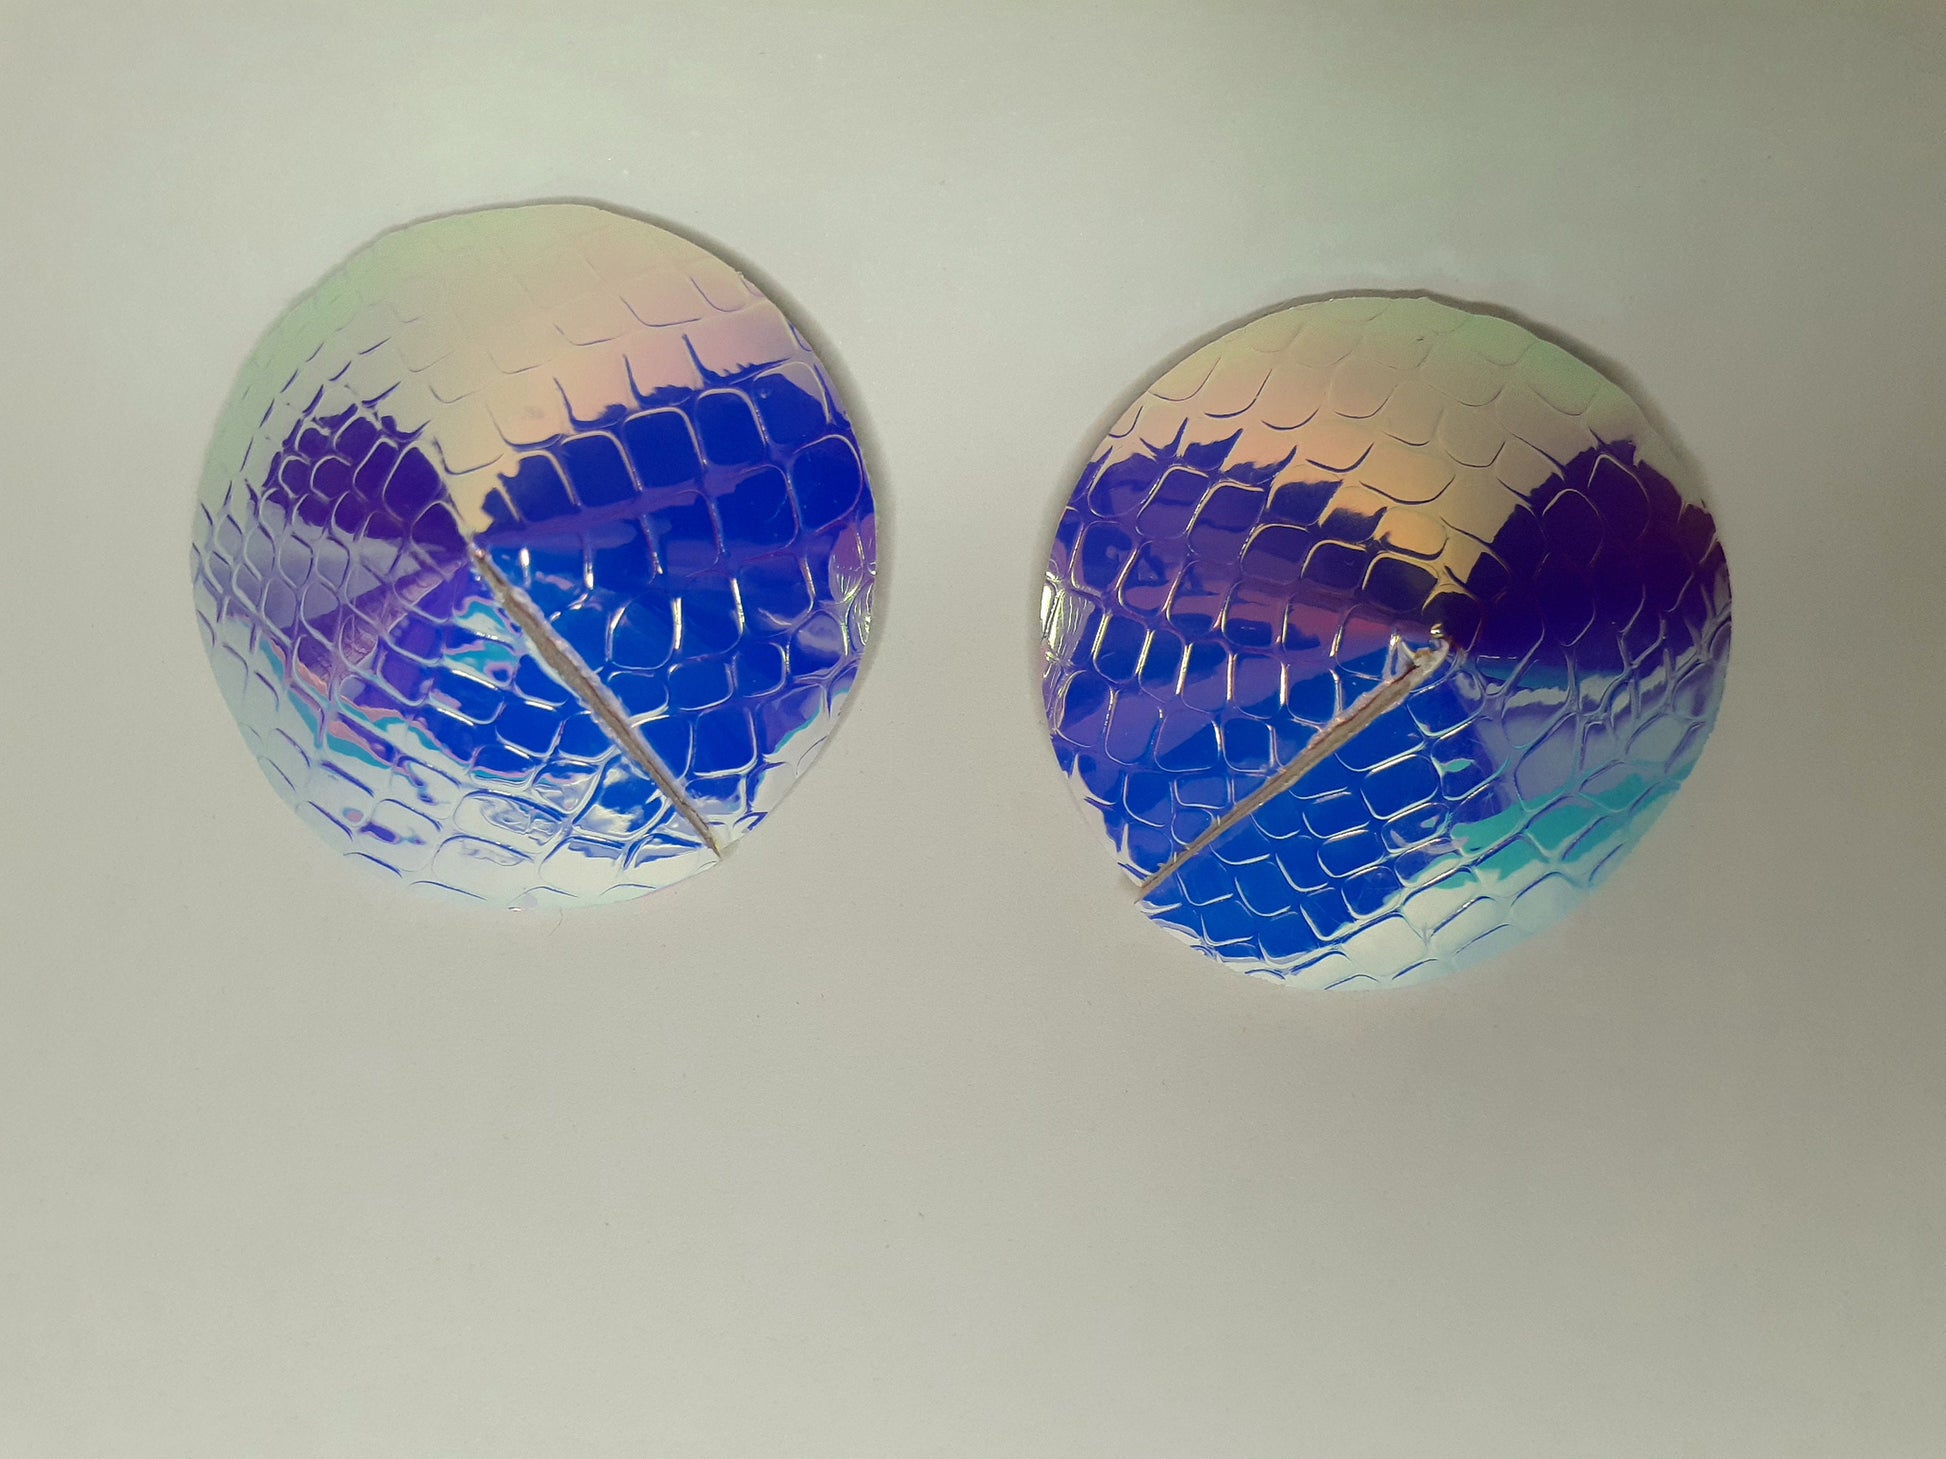 Customizable holographic fashion nipple pasties. Lingerie accessories.